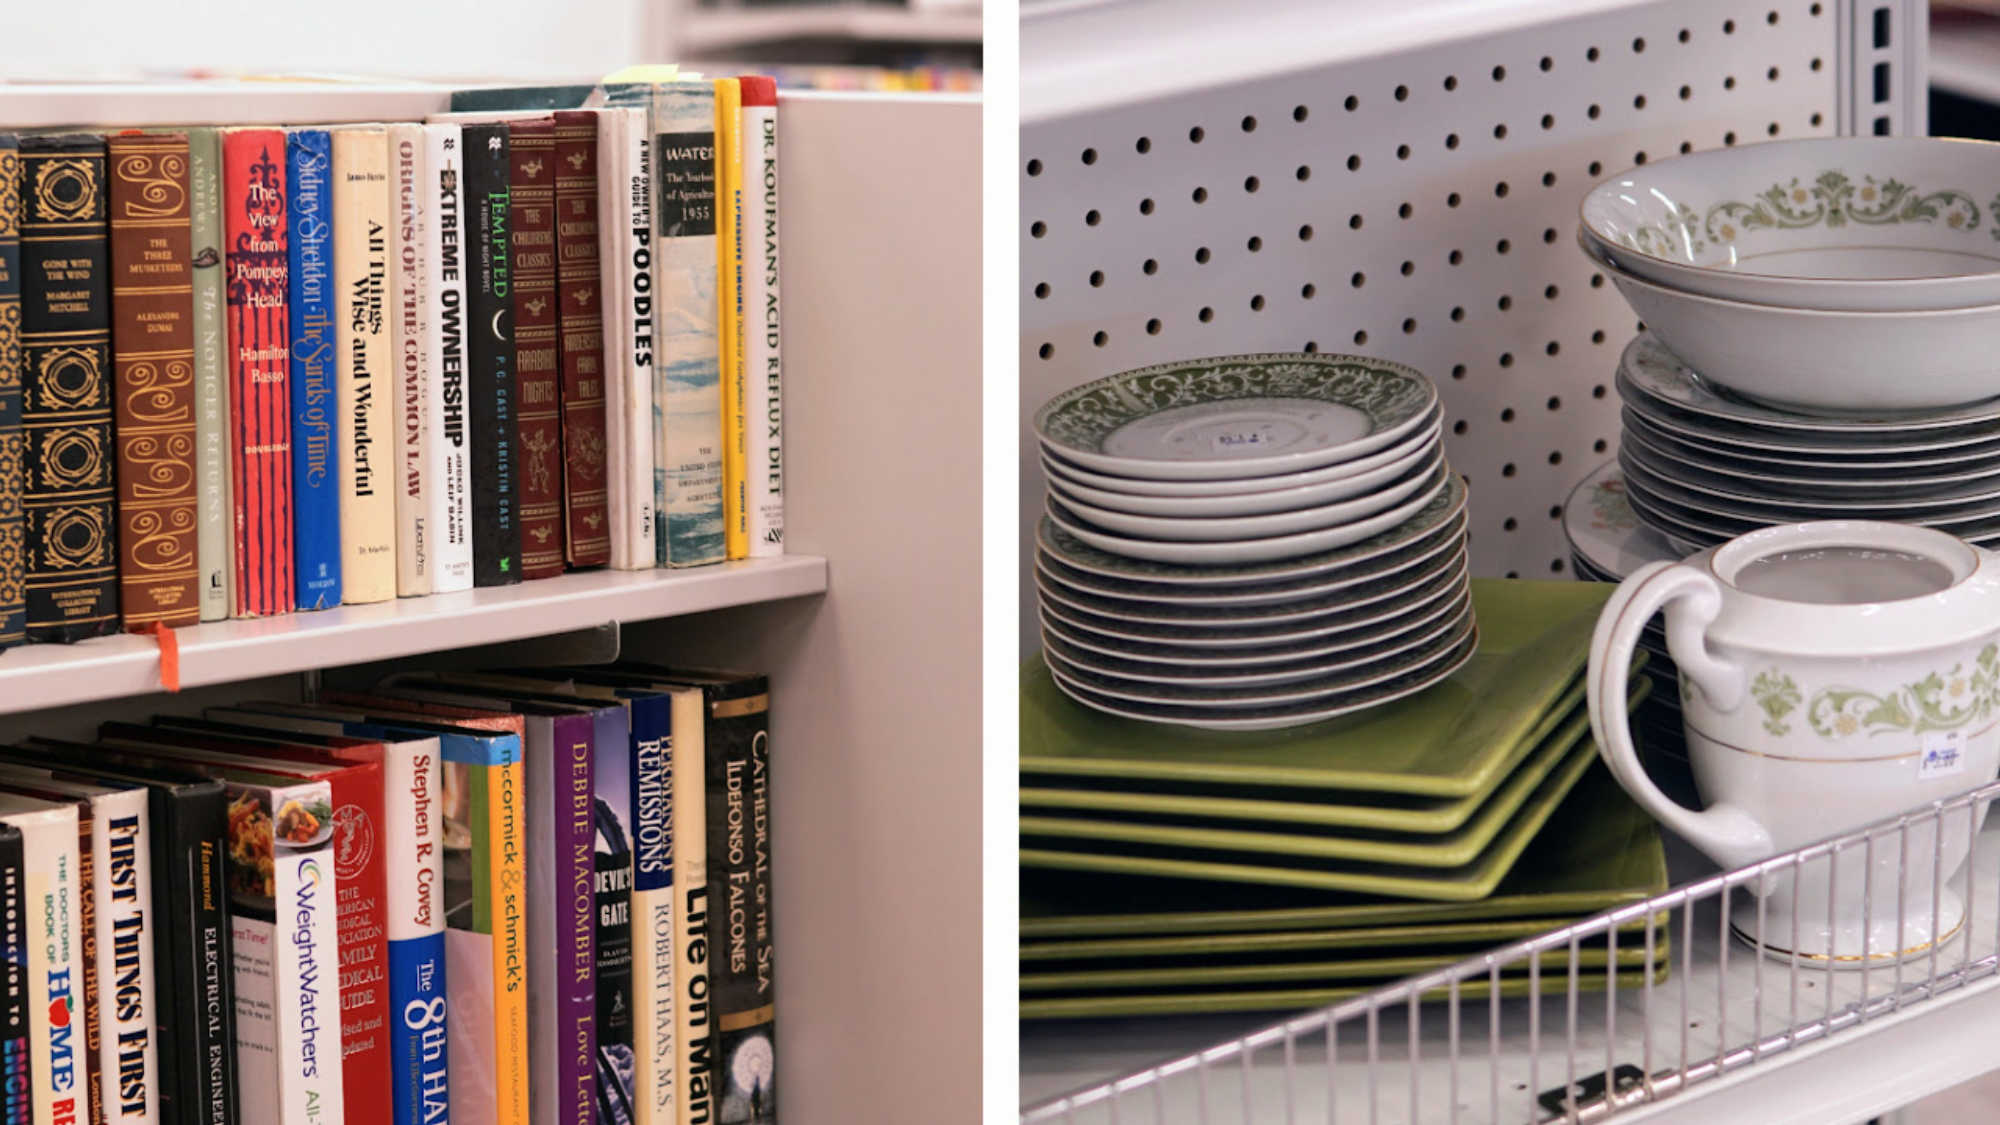 On the left, a shelf of secondhand books at DI on the right, a DI shelf with a full set of matching green and white dishes.